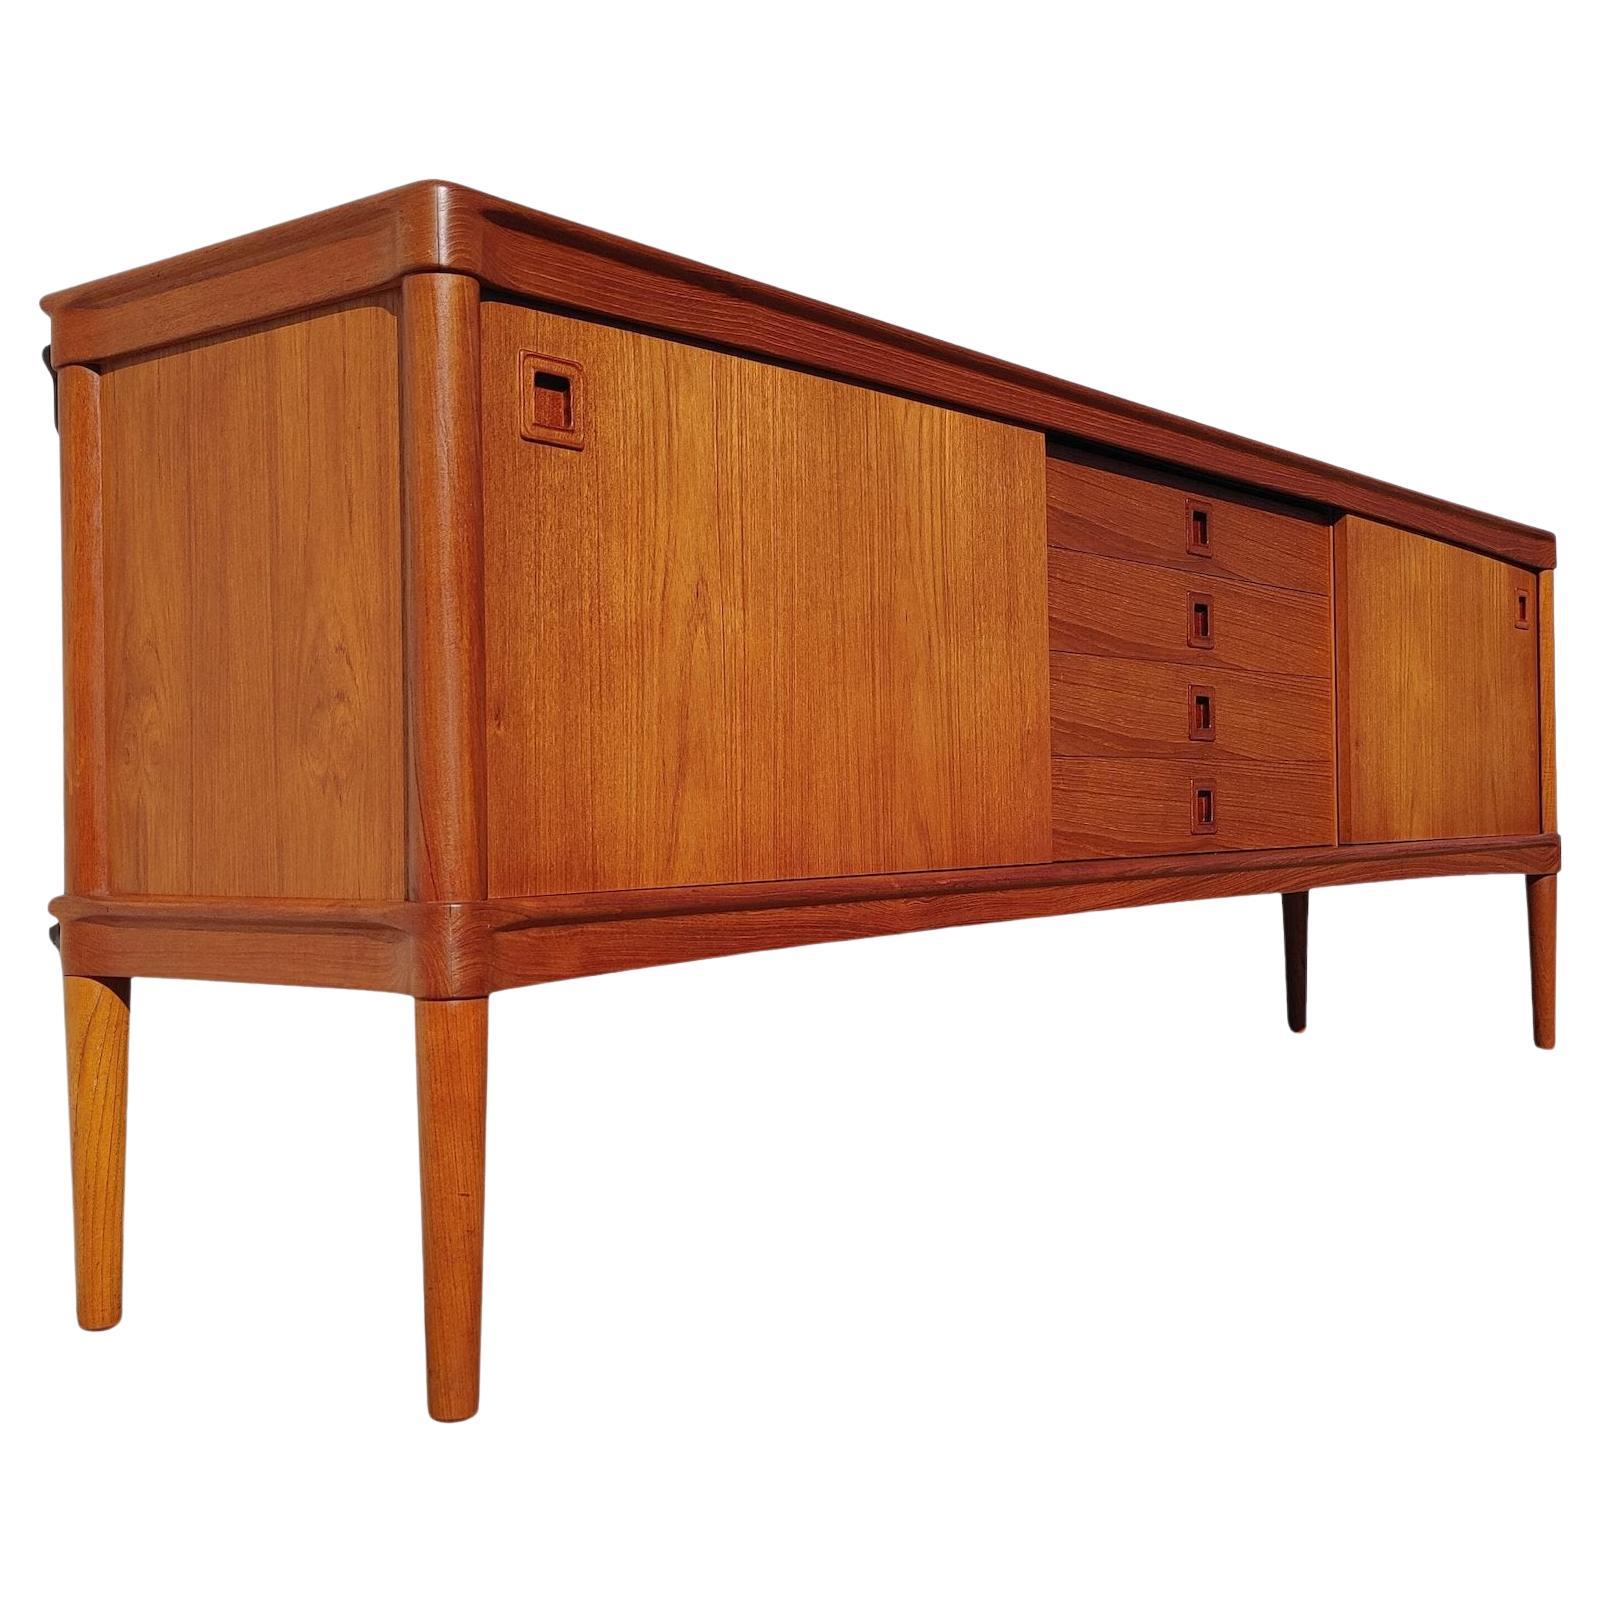 Mid Century Danish Modern Teak Sideboard by Bramin

Above average vintage condition and structurally sound. Has some expected slight finish wear and scratching. Outdoor listing pictures might appear slightly darker or more red than the item does